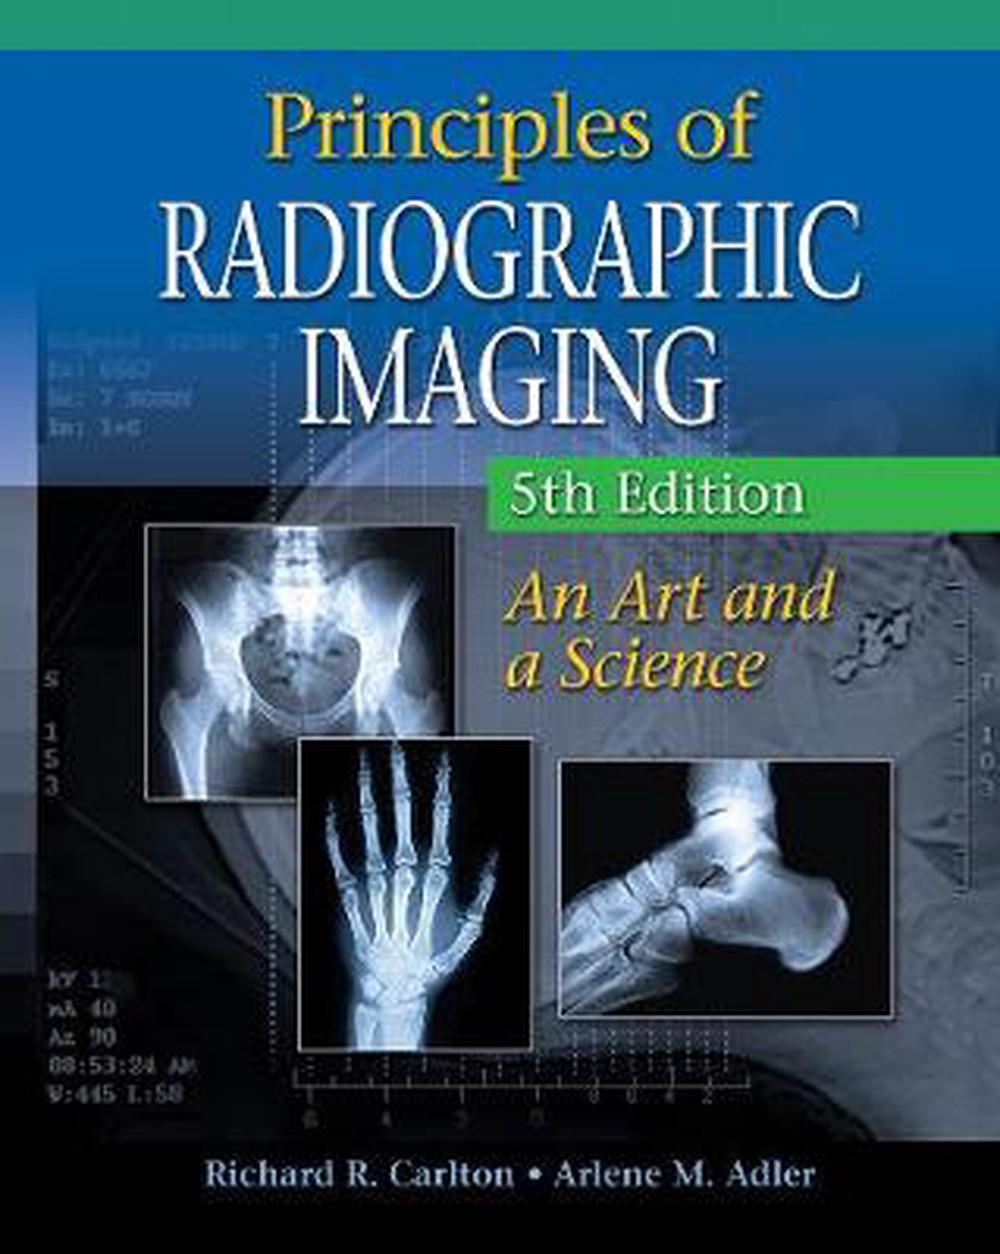 Principles of Radiographic Imaging, 5th Edition by Richard R. Carlton, Hardcover, 9781439058725